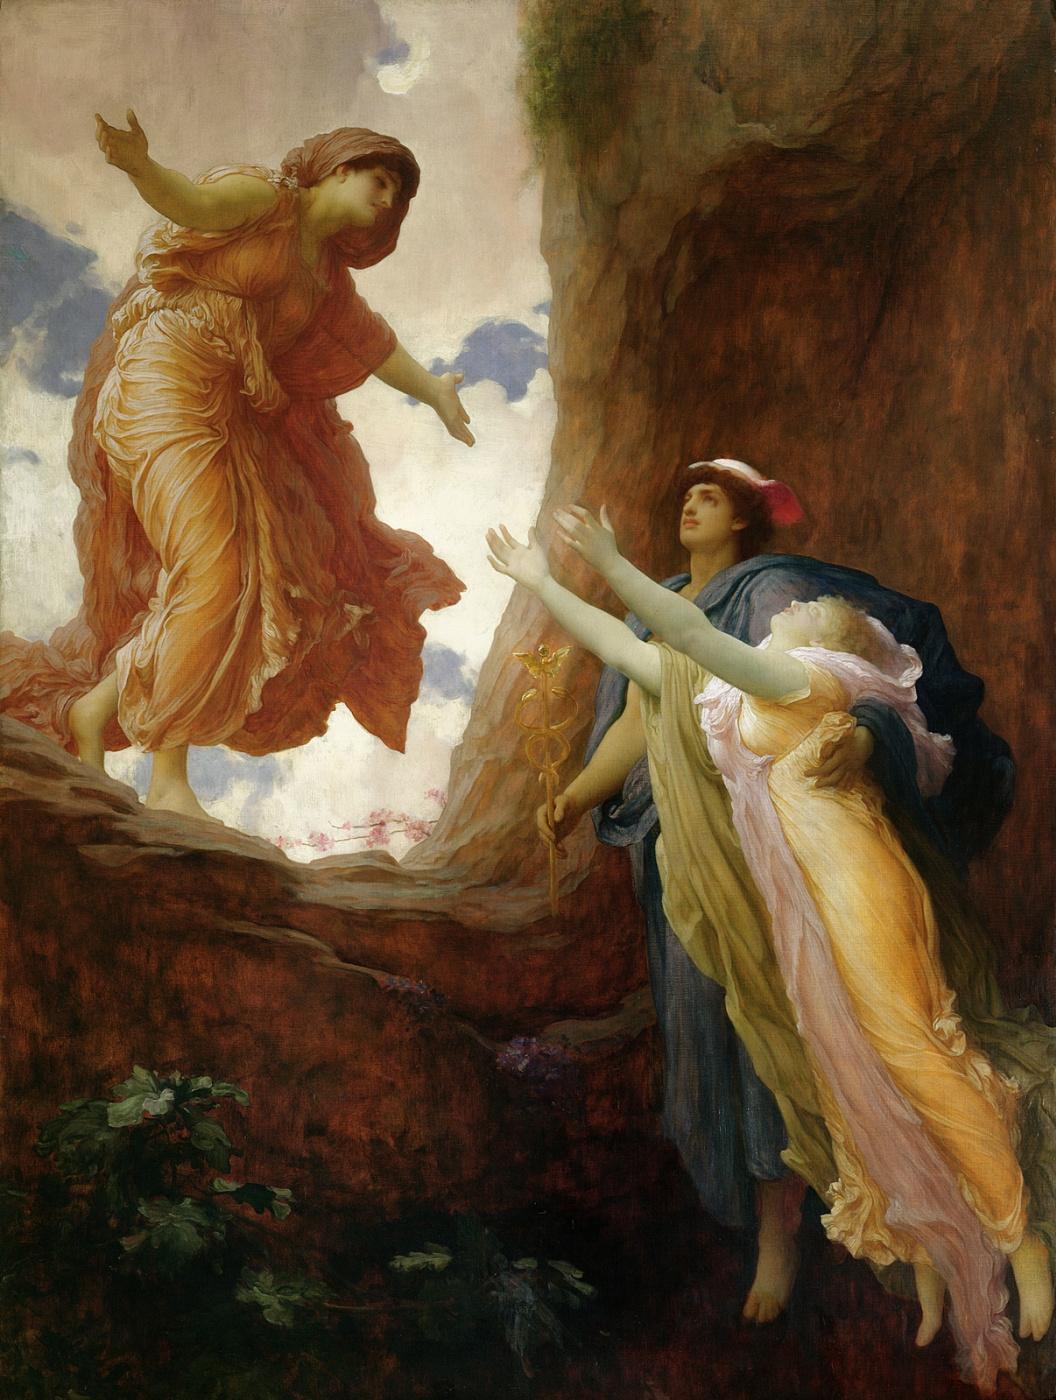 “The Return of Persephone,” 1891, by Sir Frederic Leighton. (Public Domain)